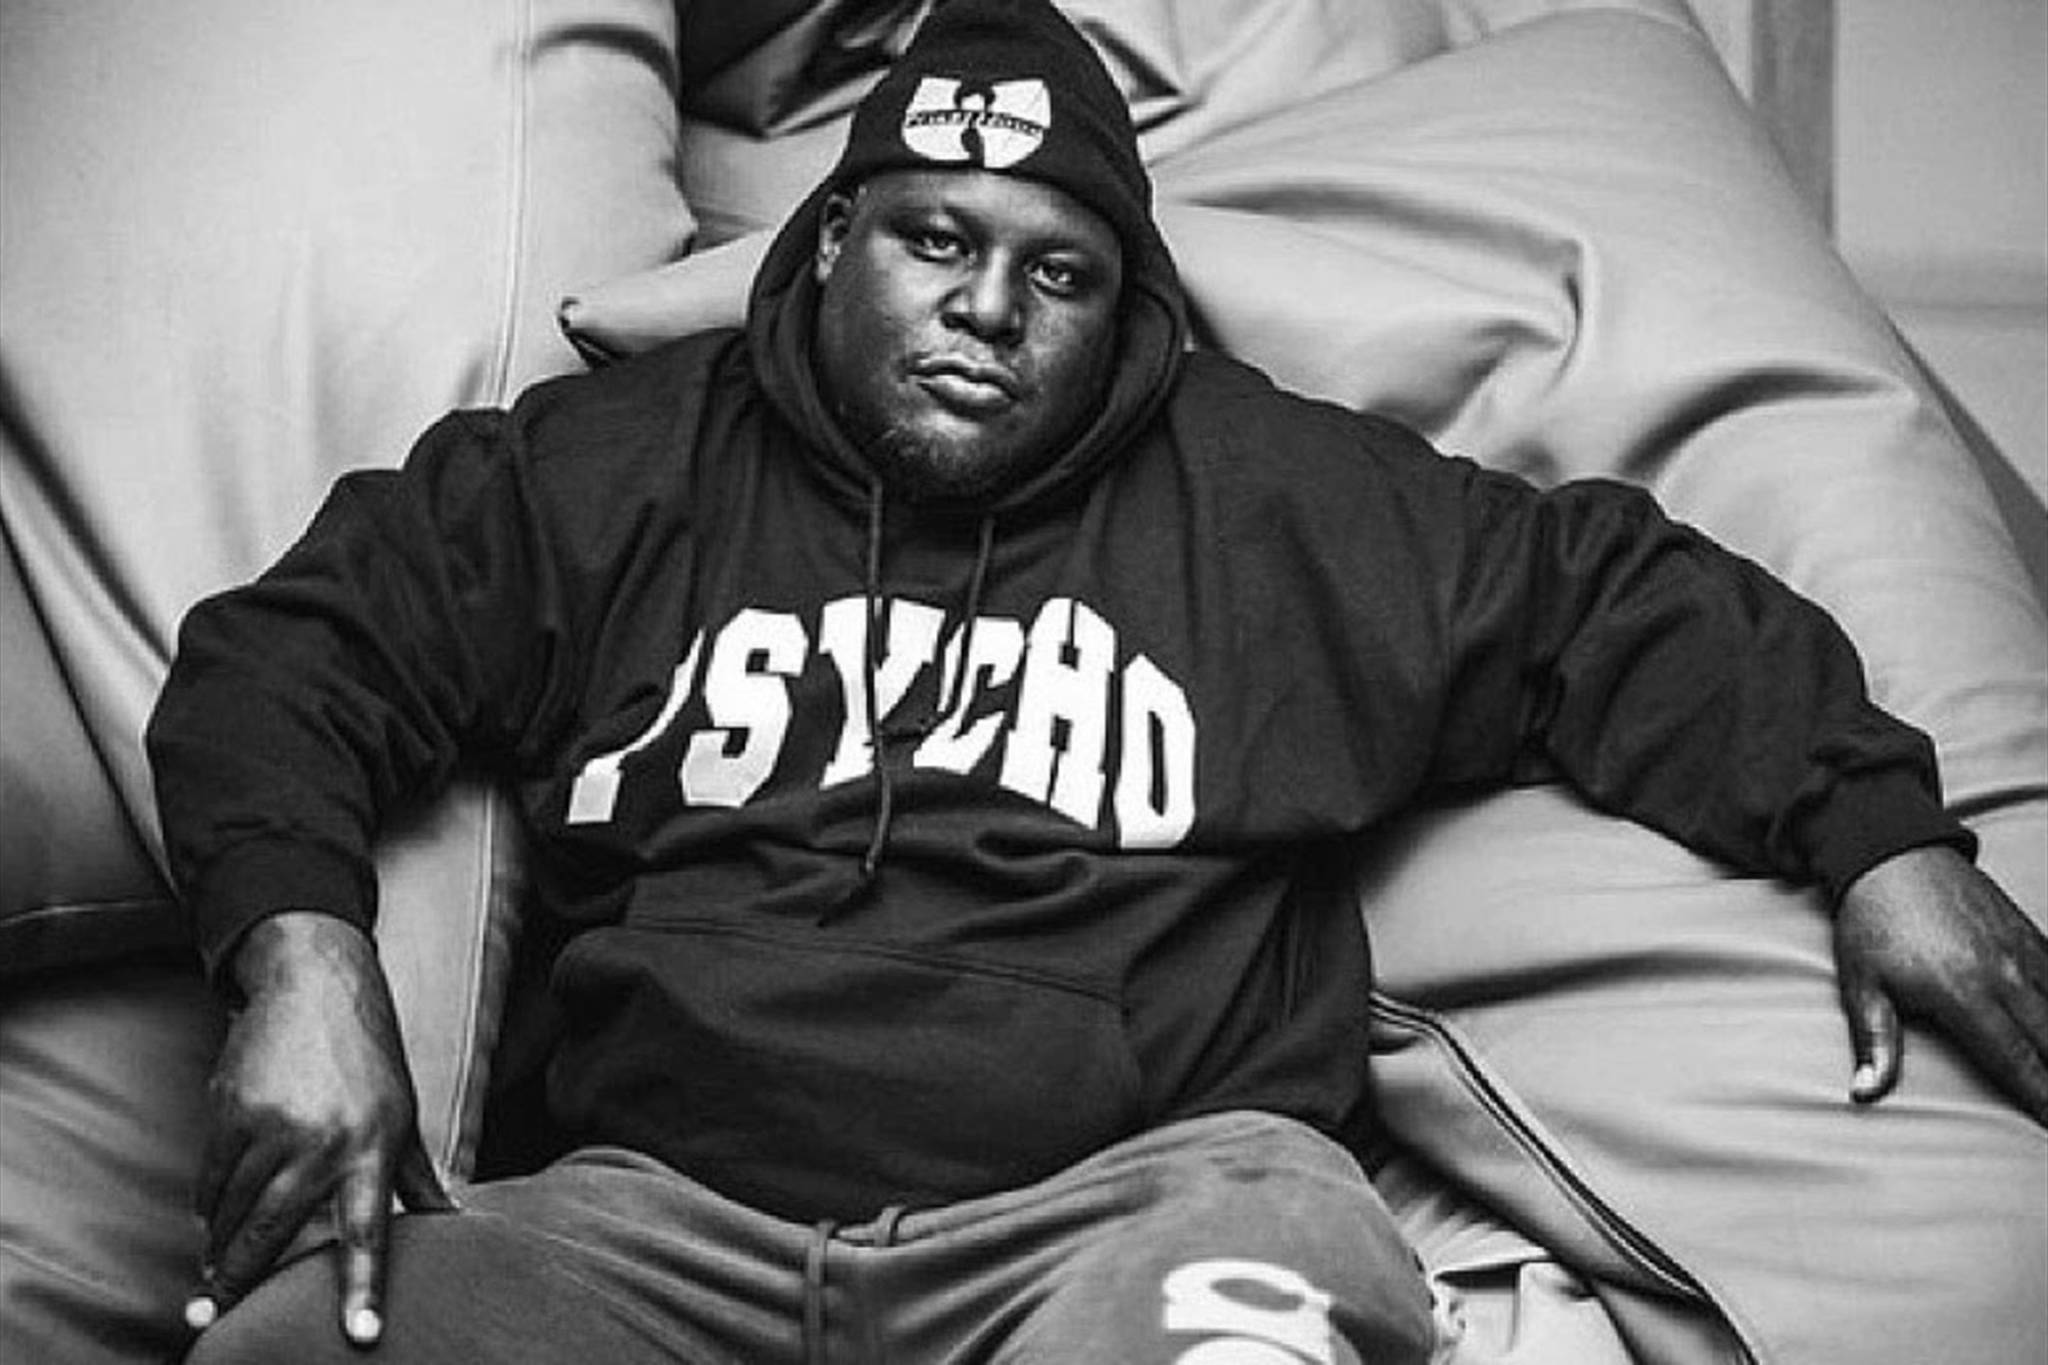 Killah Priest, who is known for his appearances on Wu-Tang Clan member albums as well as over a dozen solo efforts, will be in Juneau for a Dec. 20 concert. (Courtesy Photo | Killah Priest)